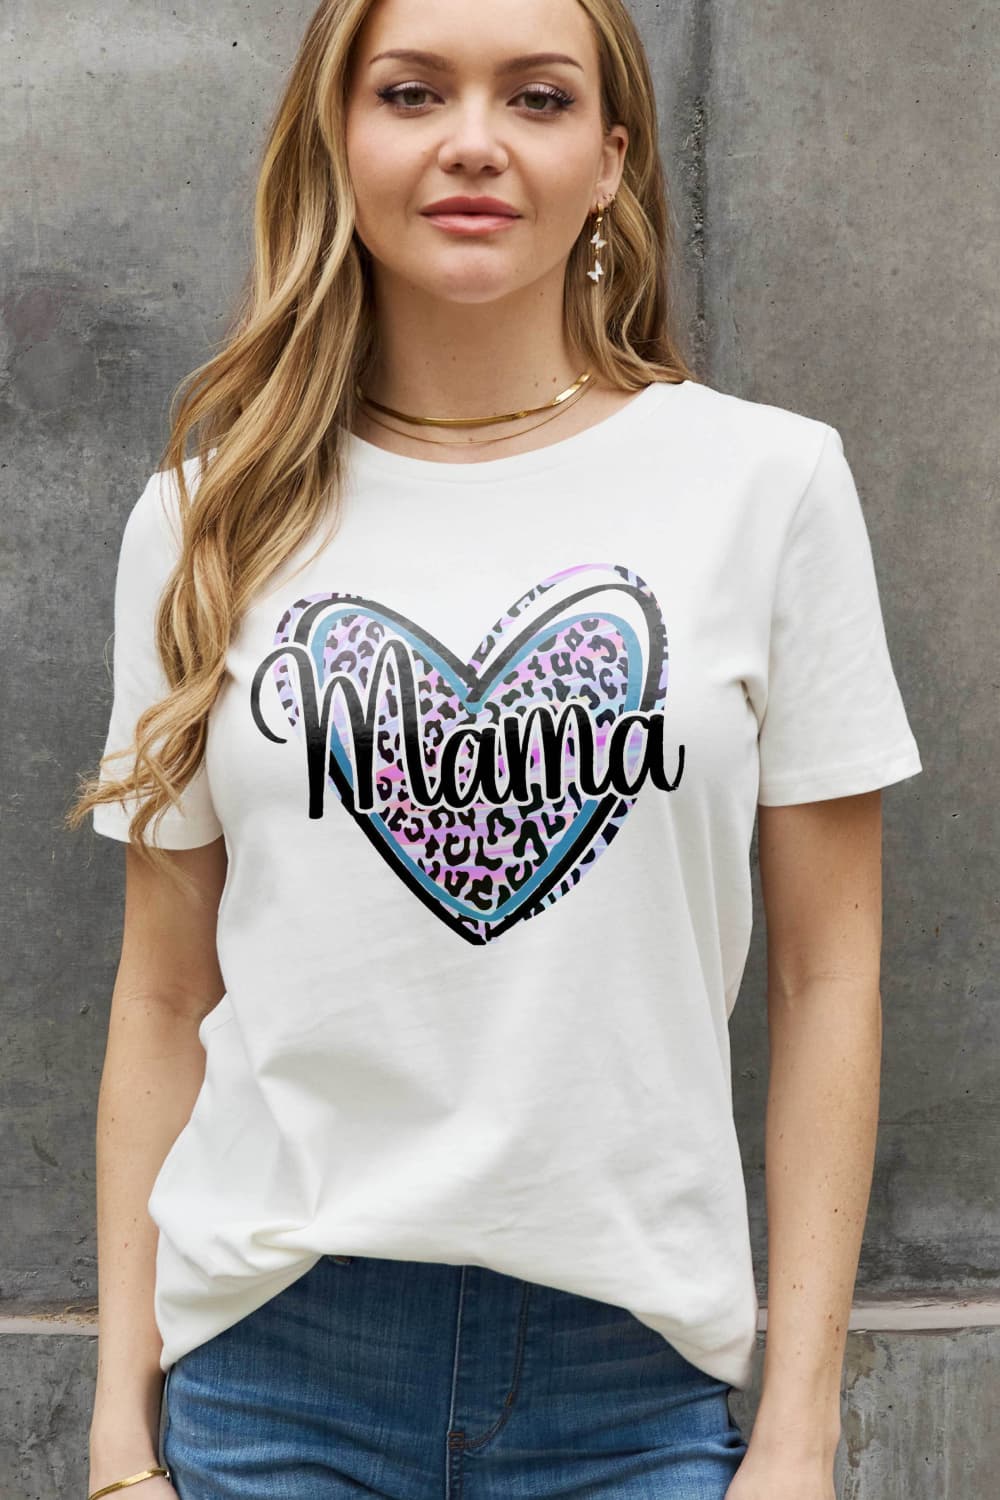 Simply Love Full Size MAMA Graphic Cotton Tee BLUE ZONE PLANET